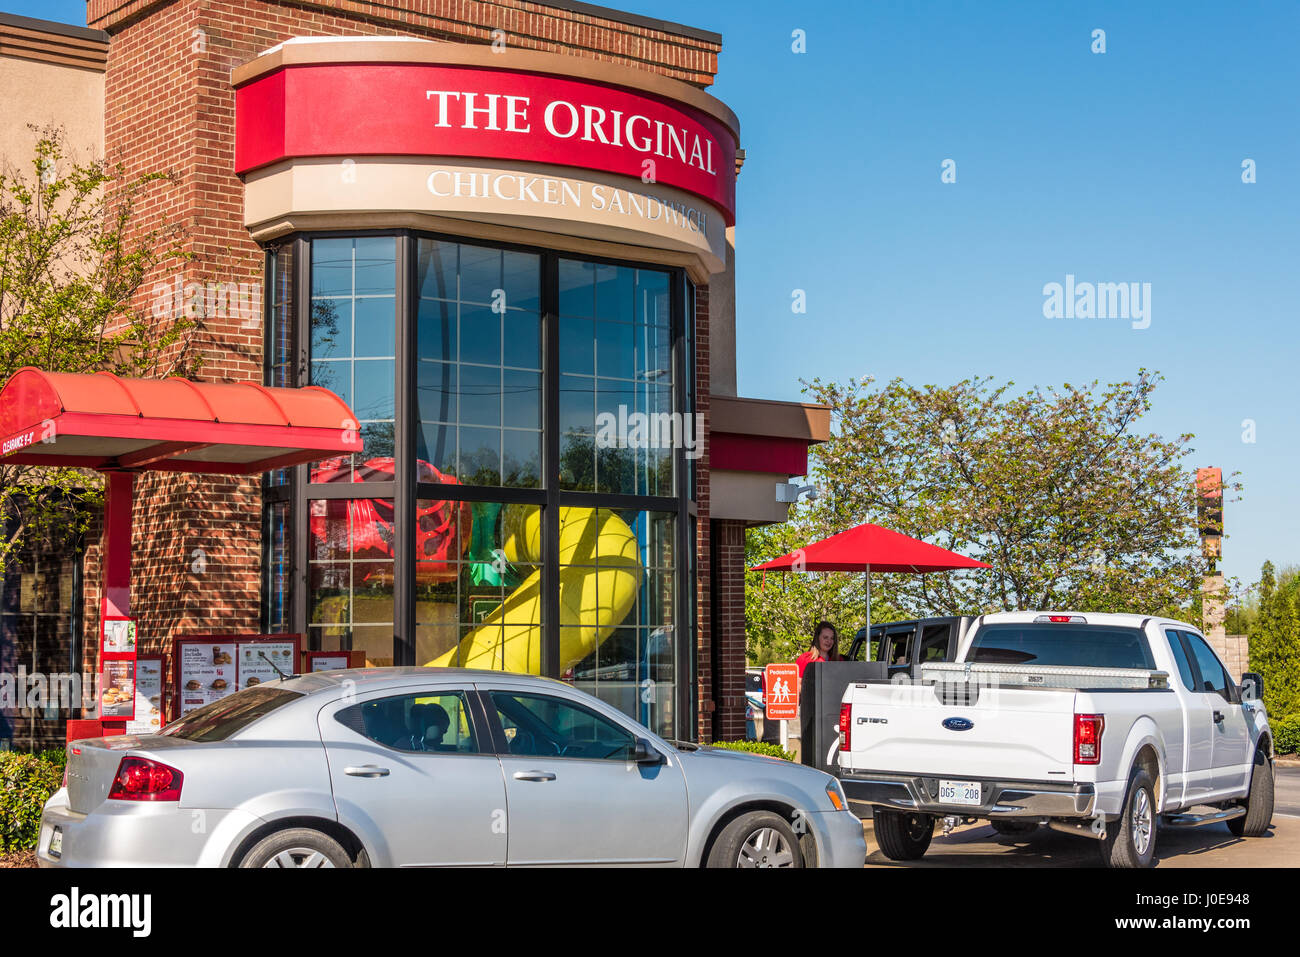 With drive-thru traffic wrapping the building, Olive Branch, Mississippi's popular Chick-fil-A restaurant delivers great food with fast service. Stock Photo